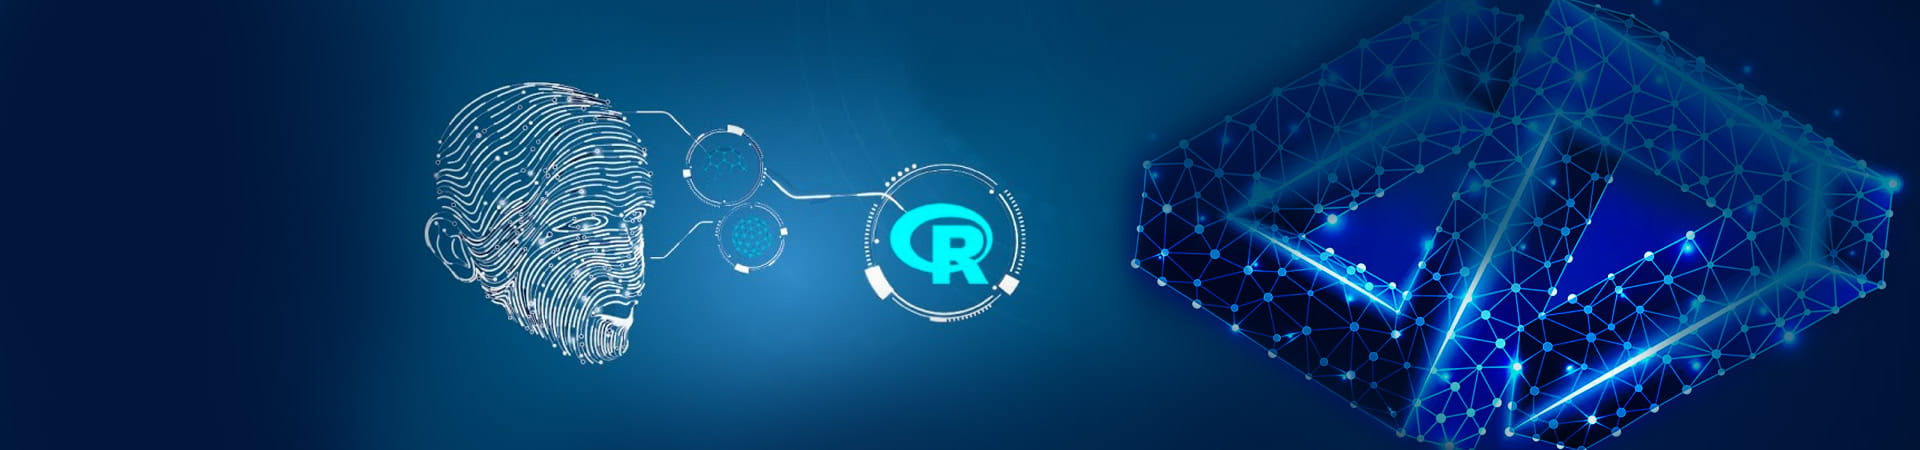 MACHINE LEARNING CON R